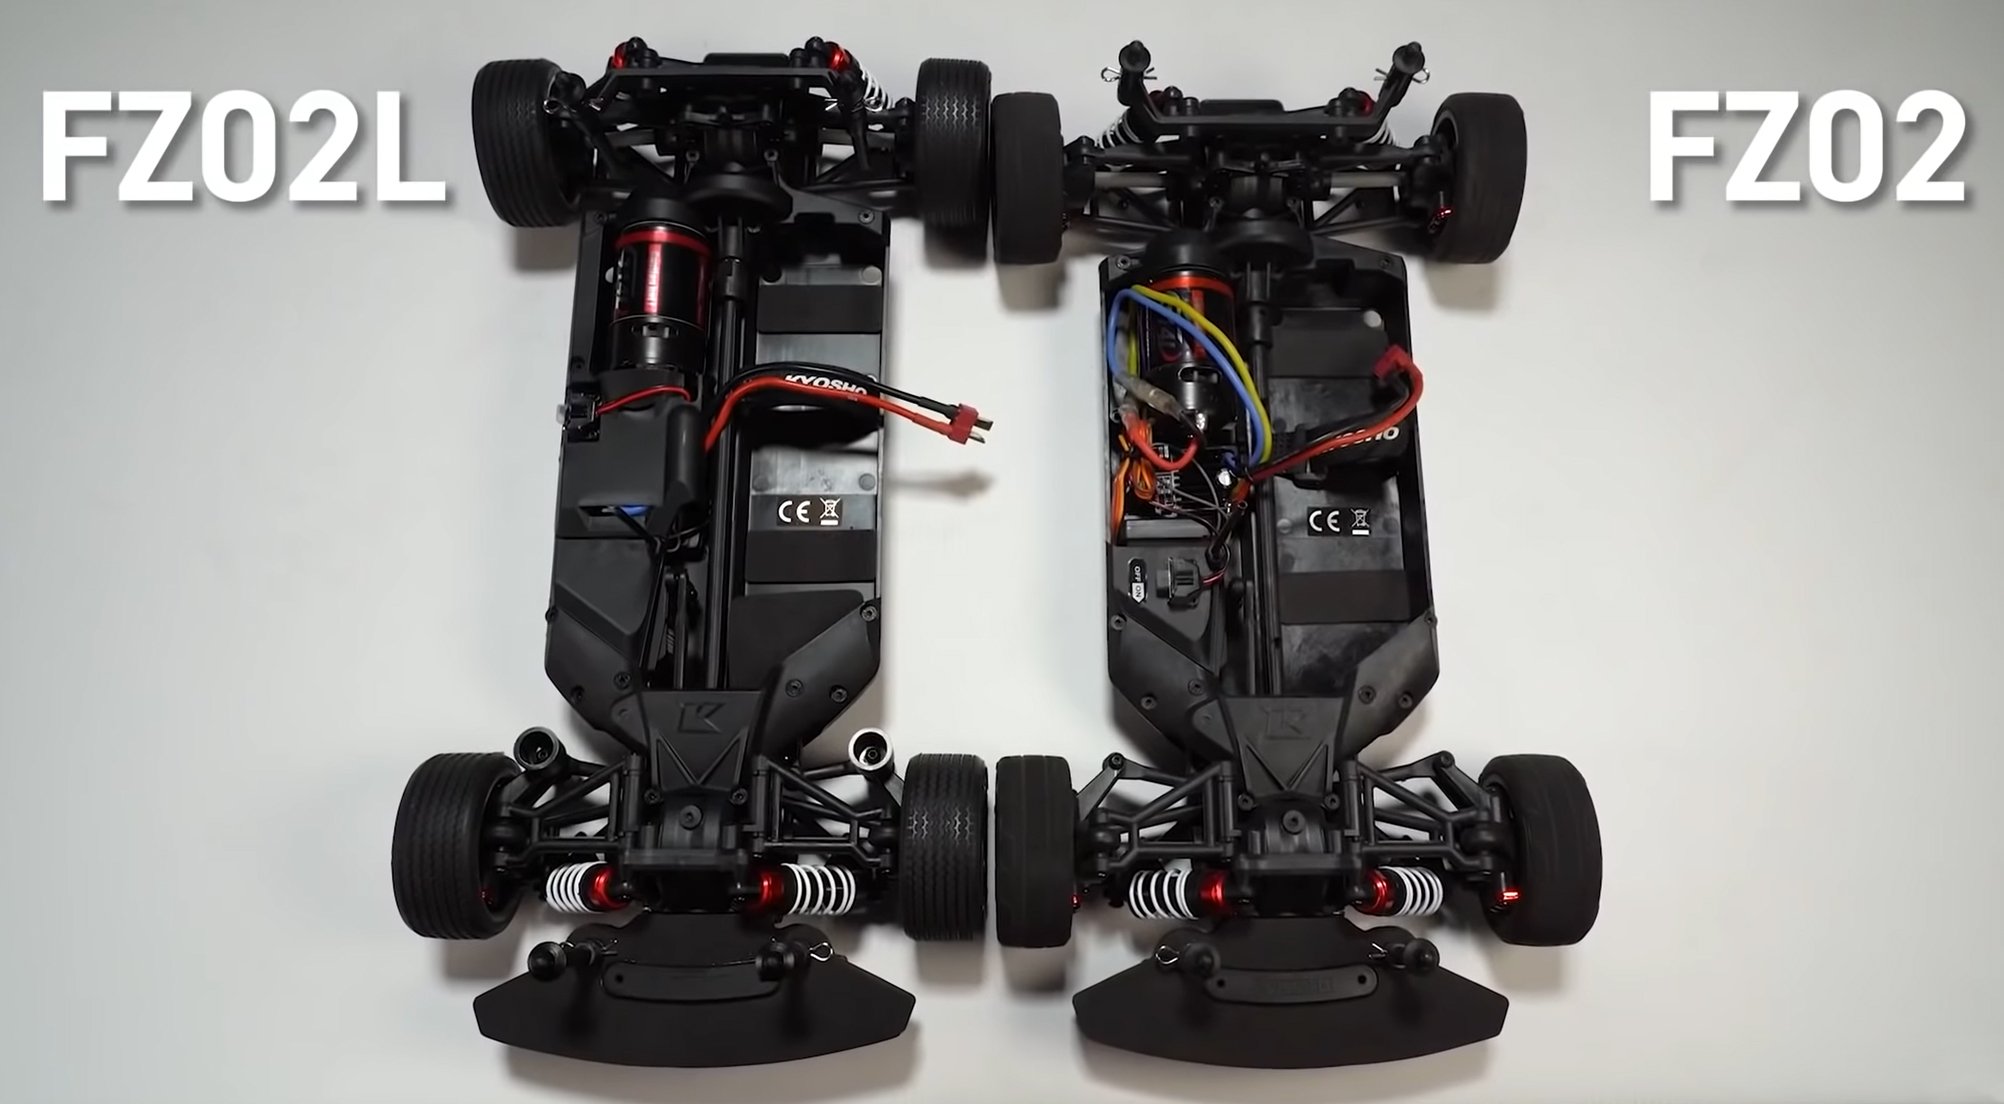 Two Chassis Lengths FZ02 and FZ02L